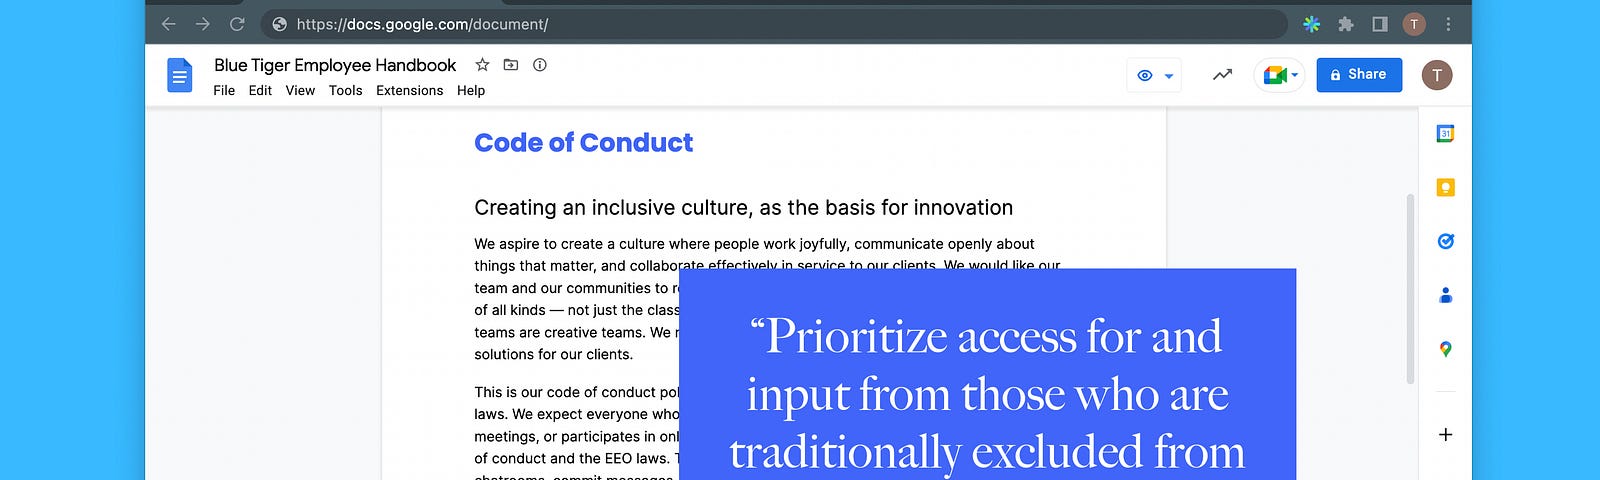 Screenshot of Blue Tiger’s Code of Conduct. Highlighted: “Prioritize access for and input from those who are traditionally excluded from the civic process.”